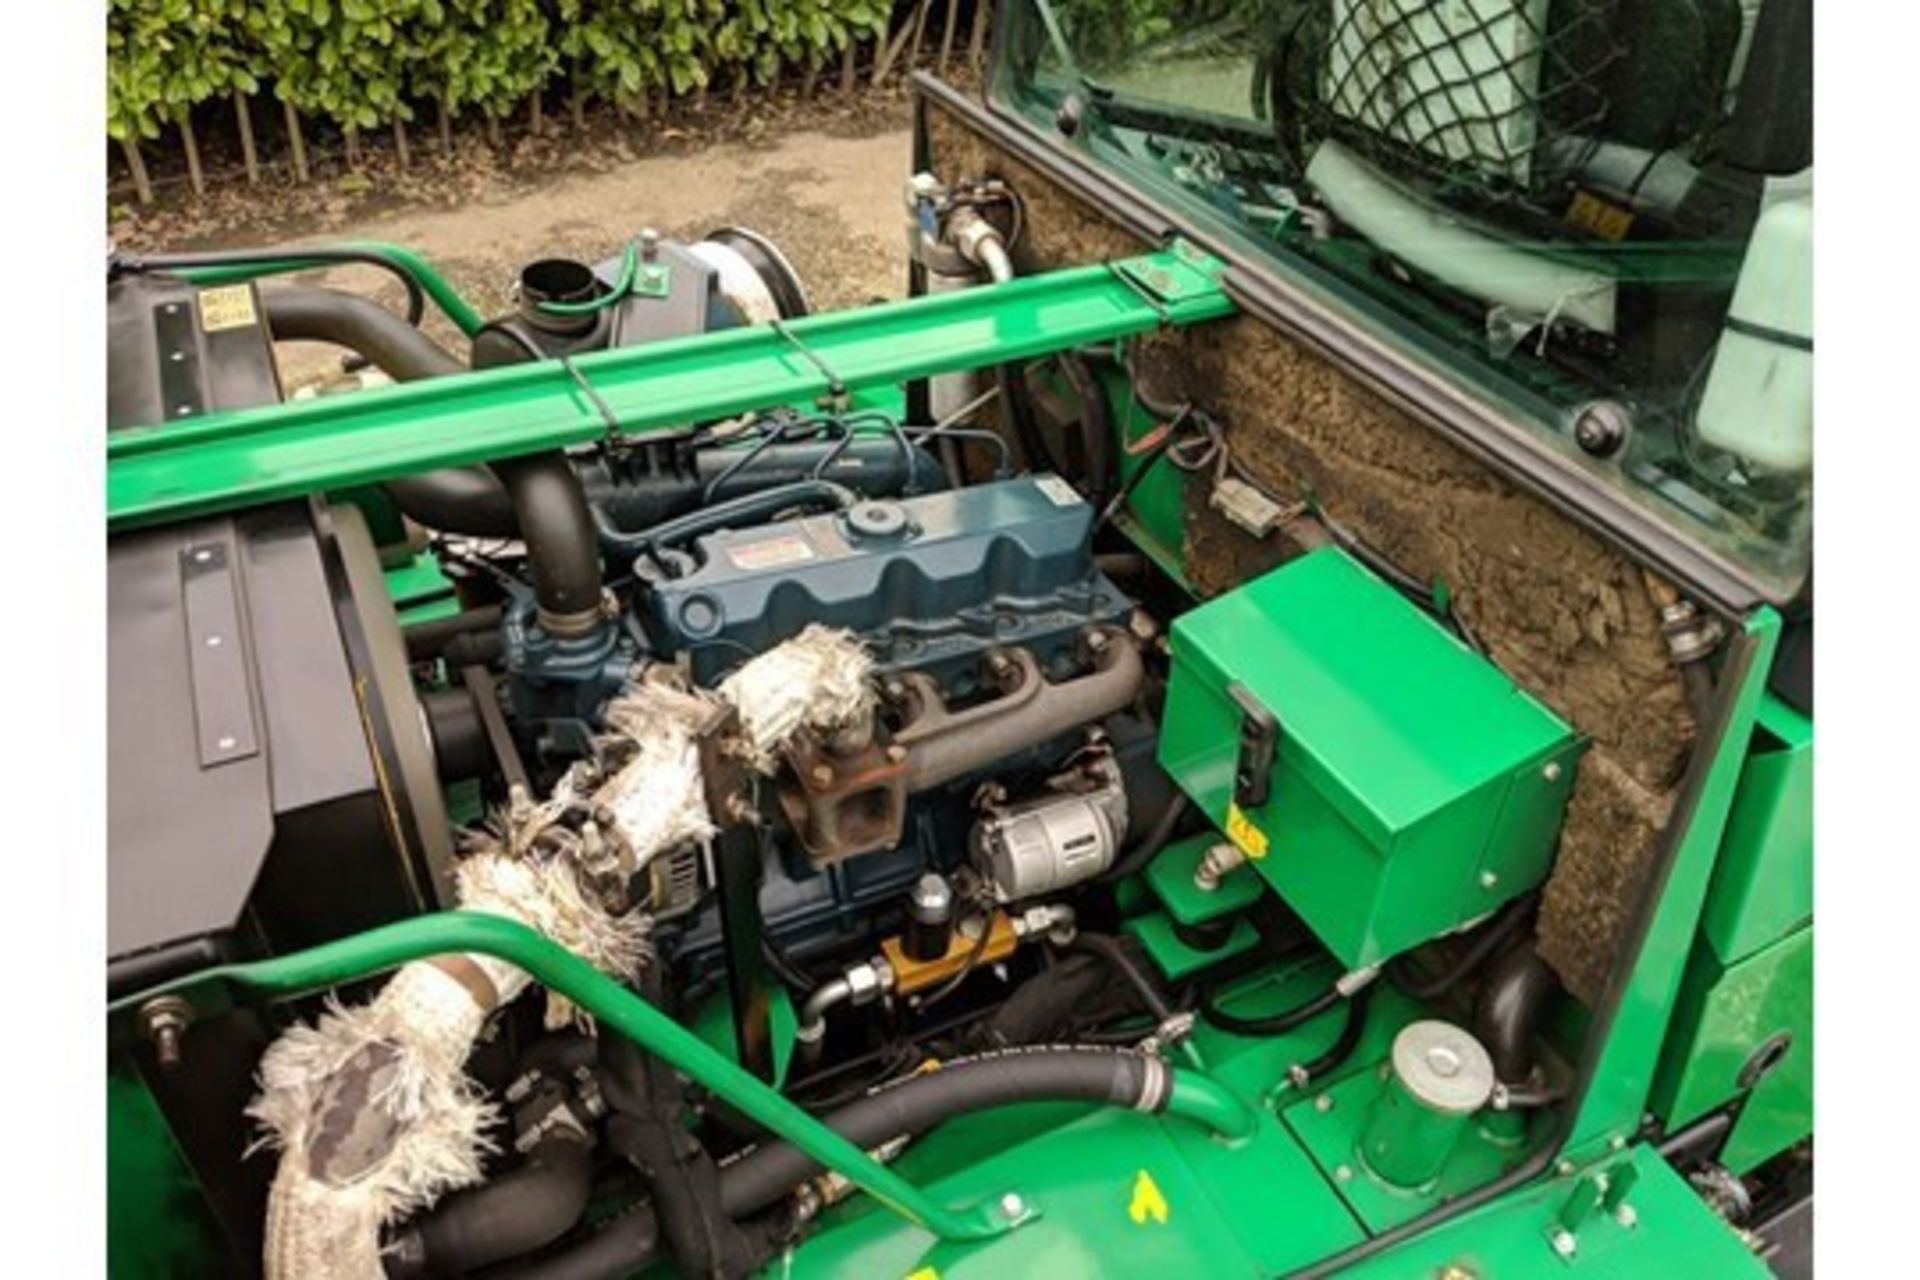 2012 Ransomes Commander 3520 4WD Cylinder Mower - Image 7 of 8